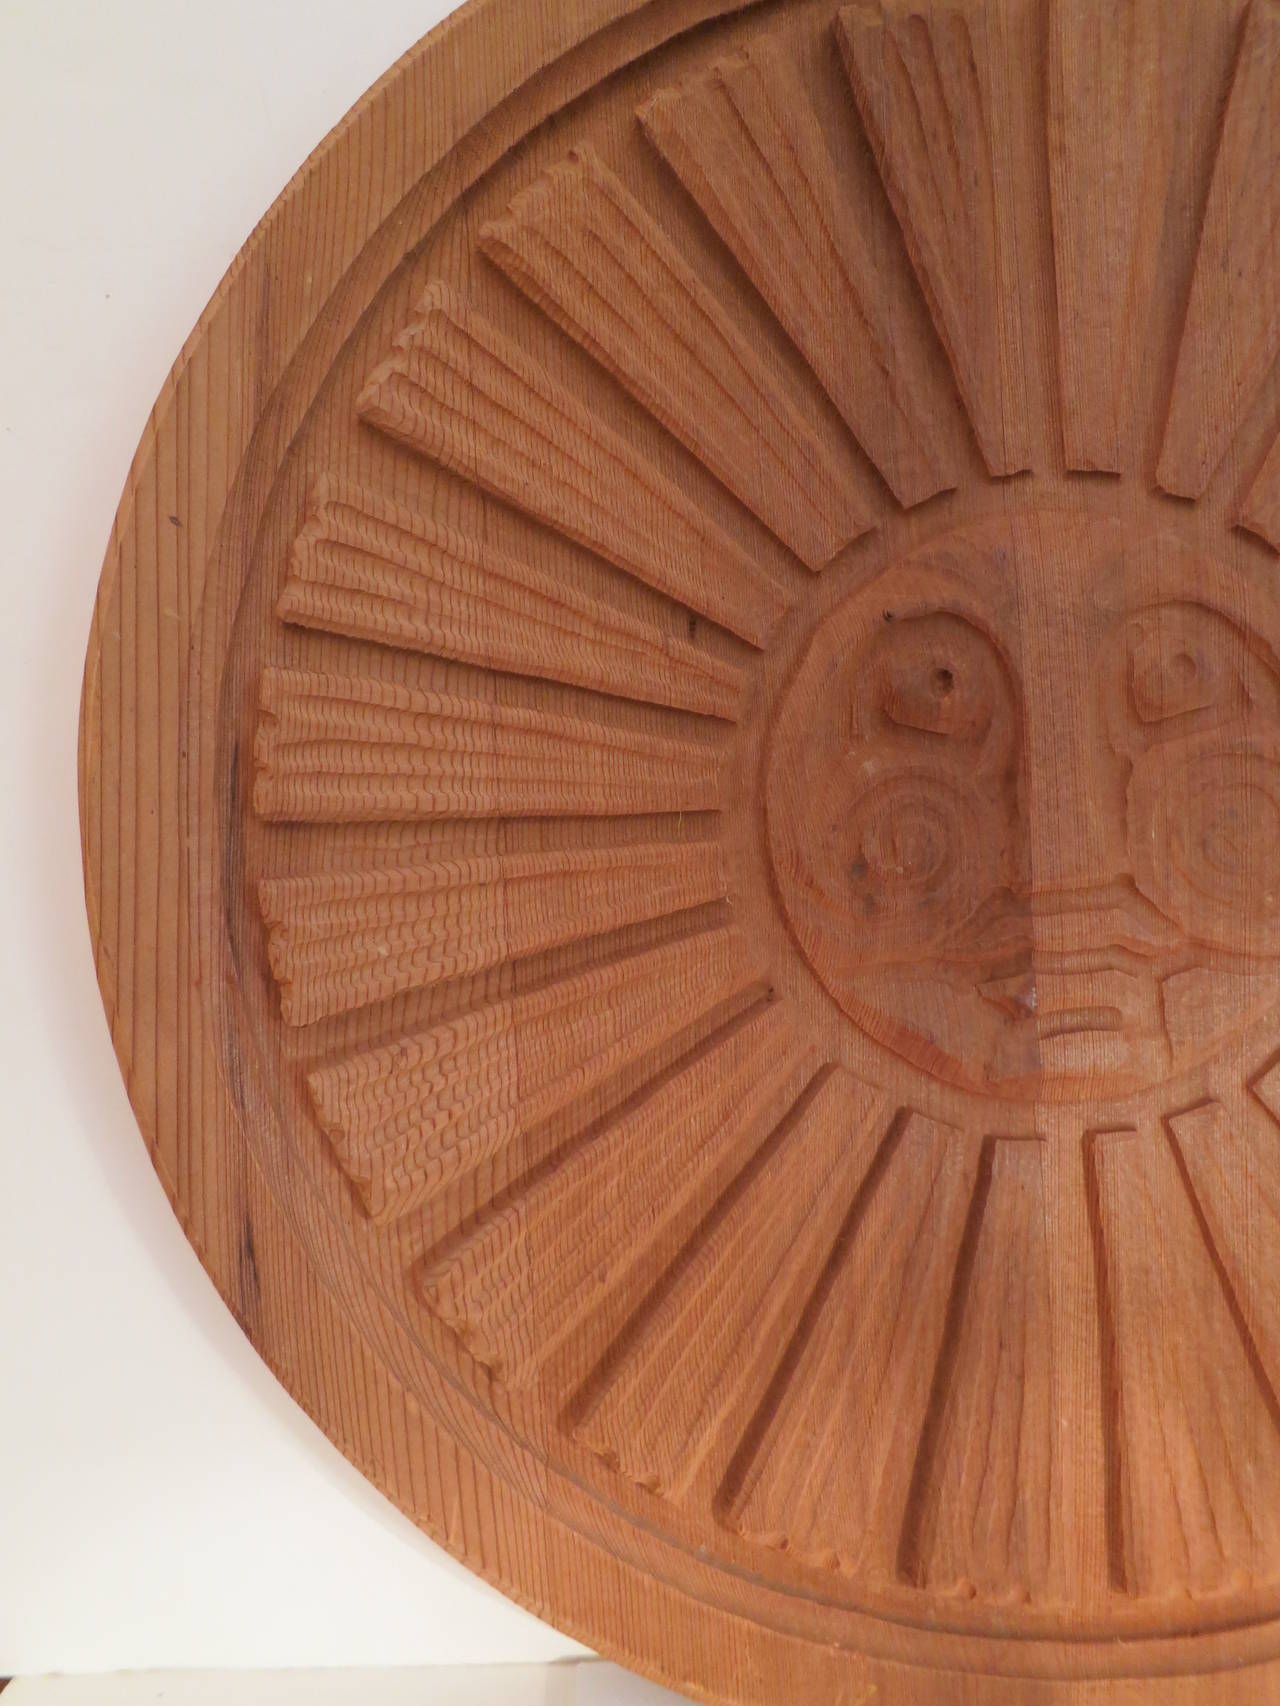 Early piece by Sherrill Broudy of Forms and Surfaces of carved, redwood sun.